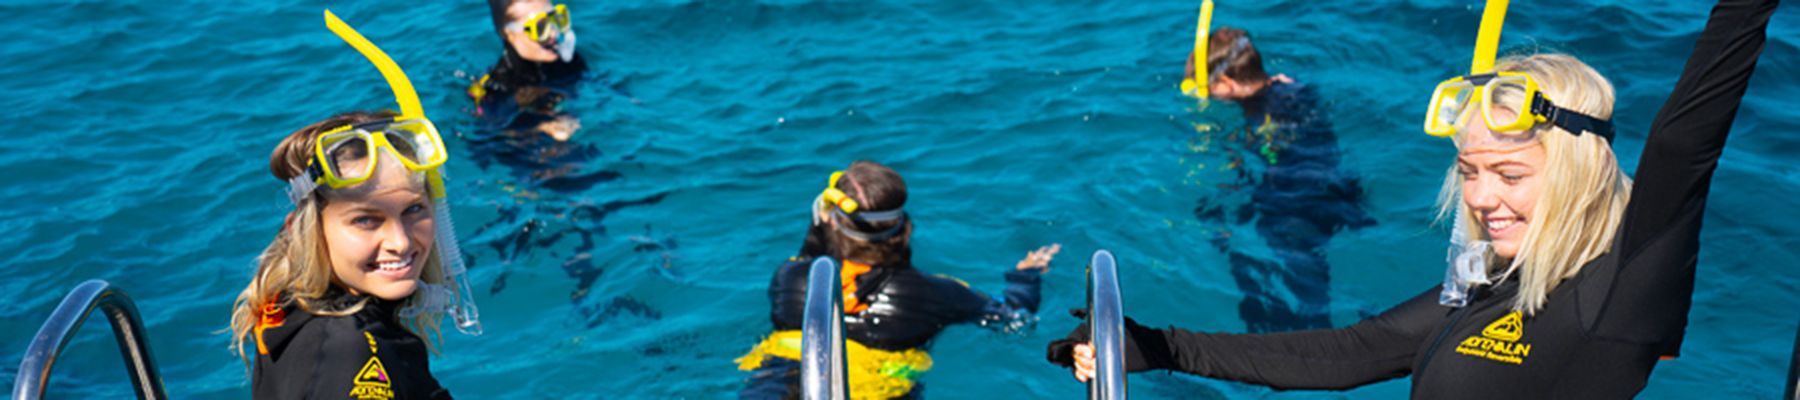 Two girls with yellow snorkels and black wetsuits on the back of a boat